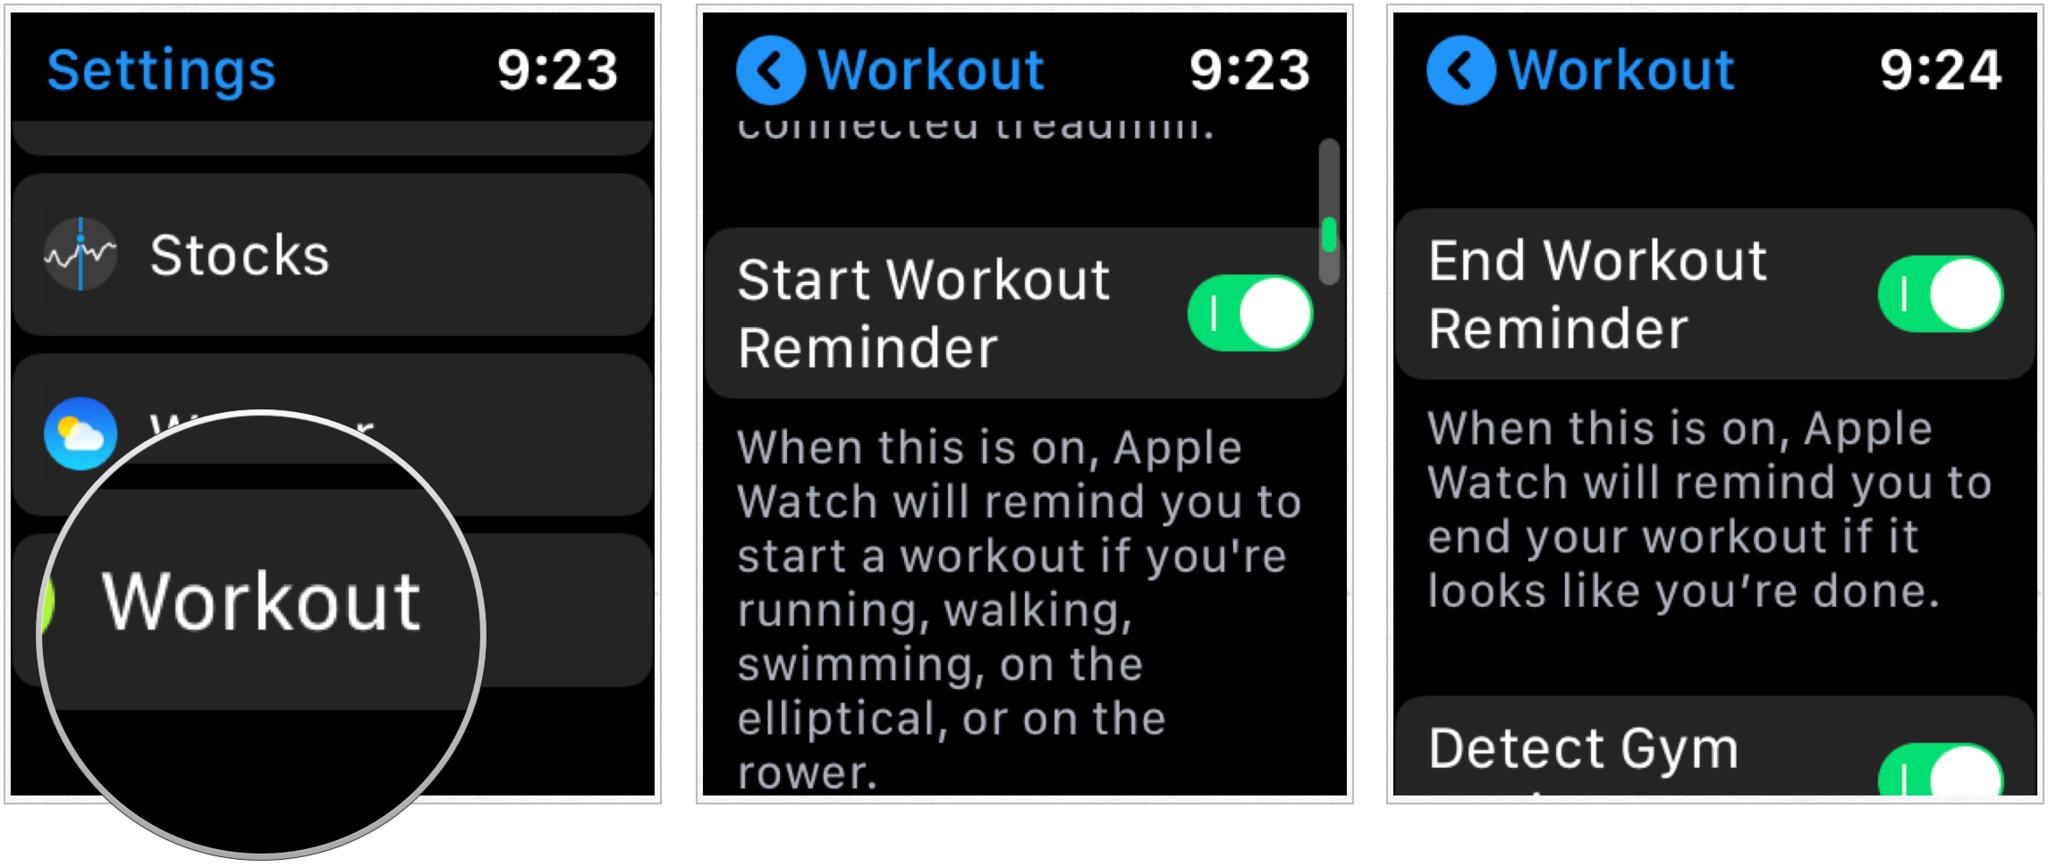 Workout detection on/off